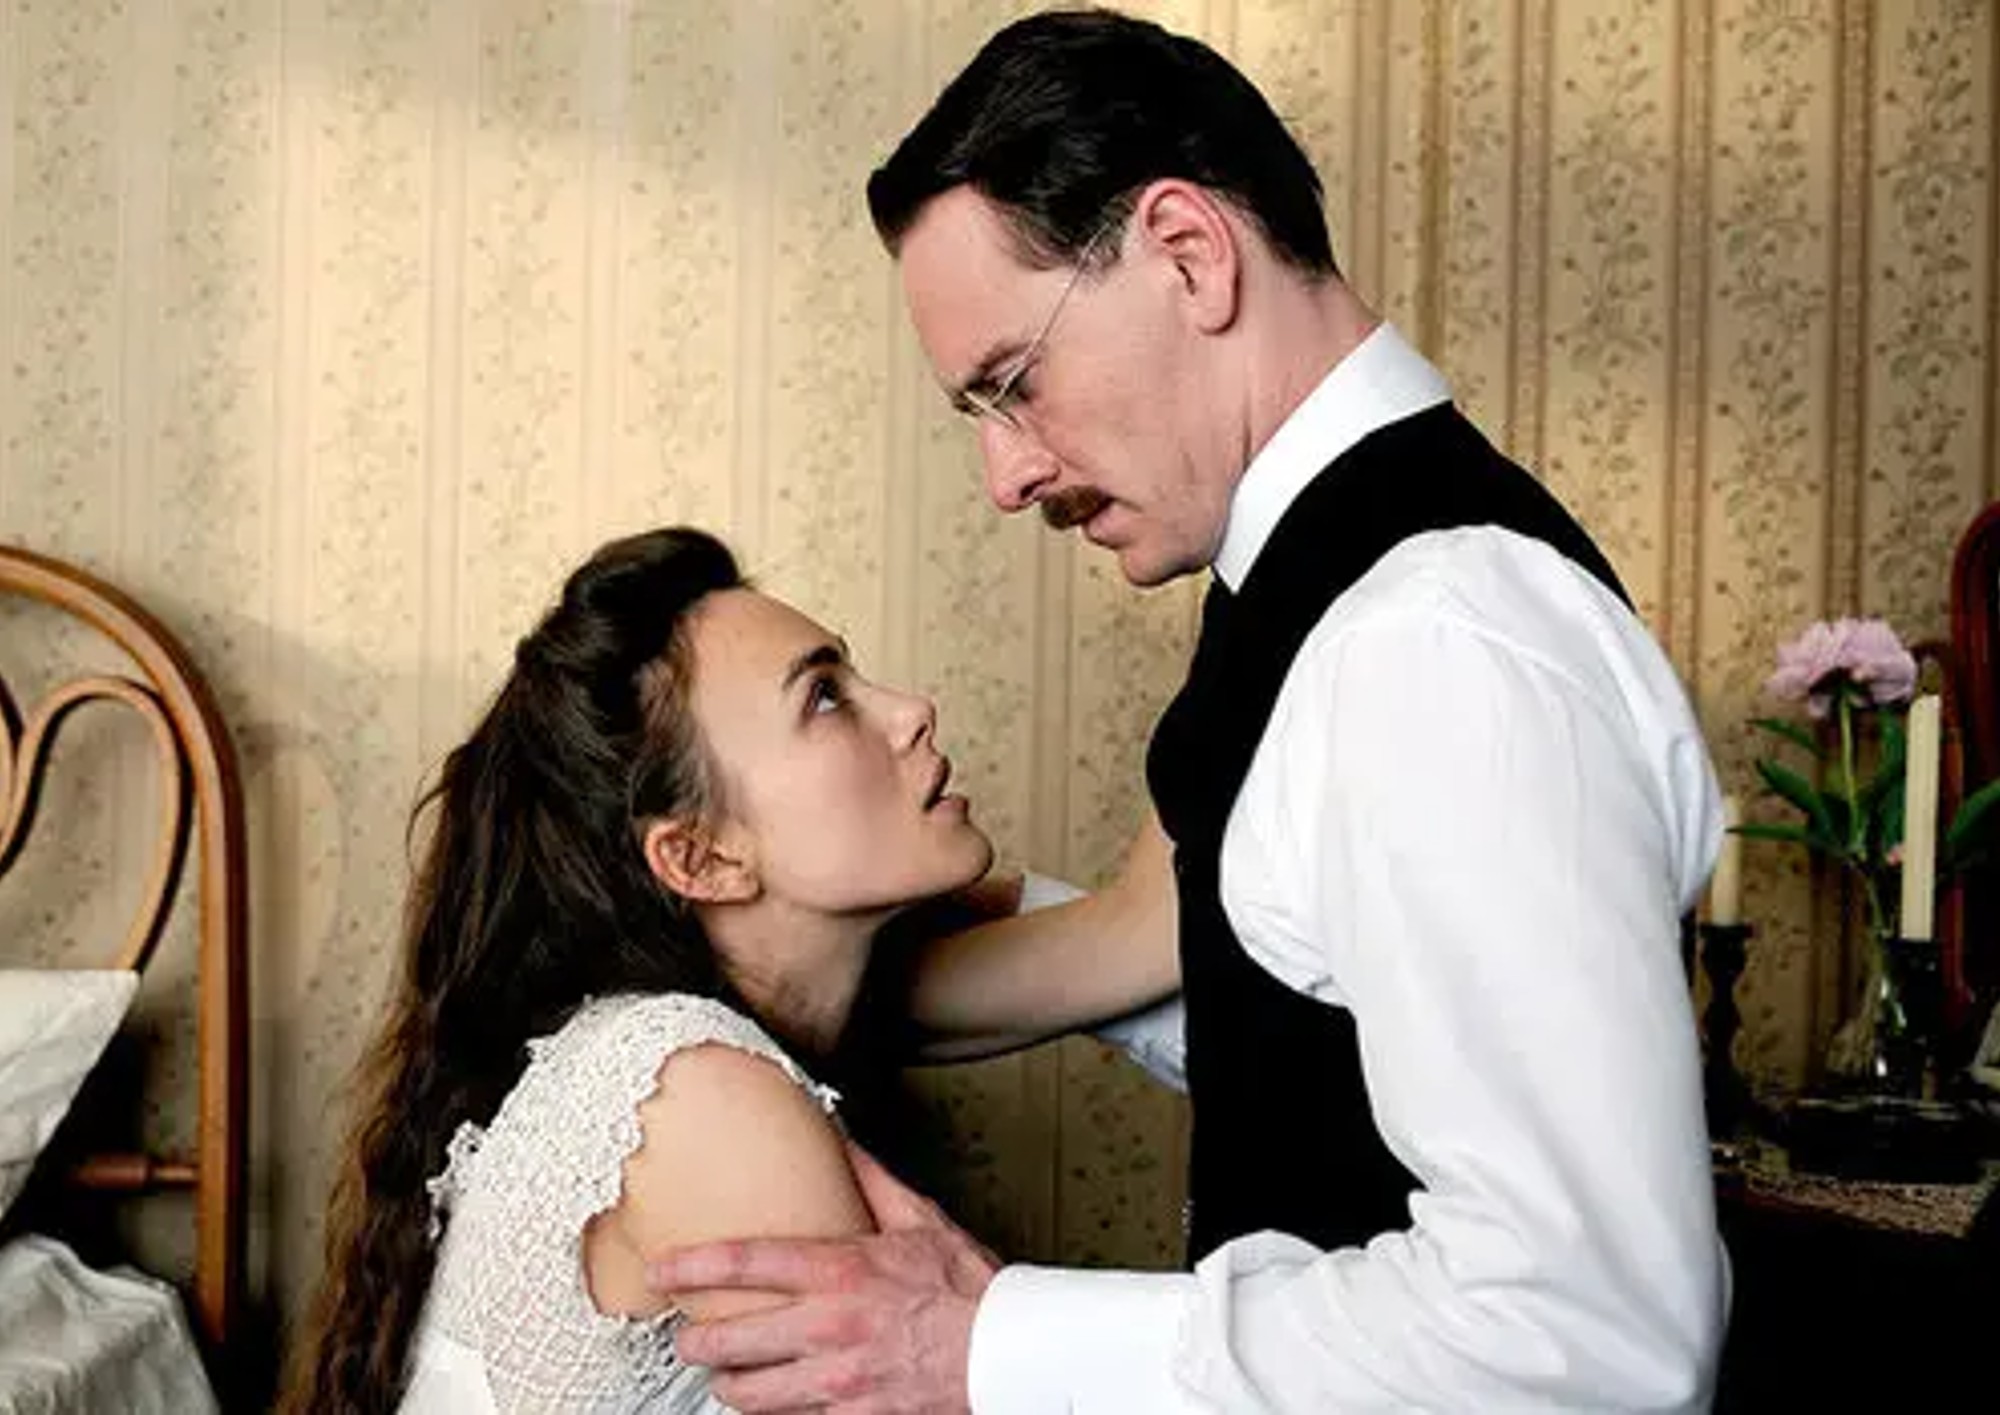 A scene from the movie A Dangerous Method